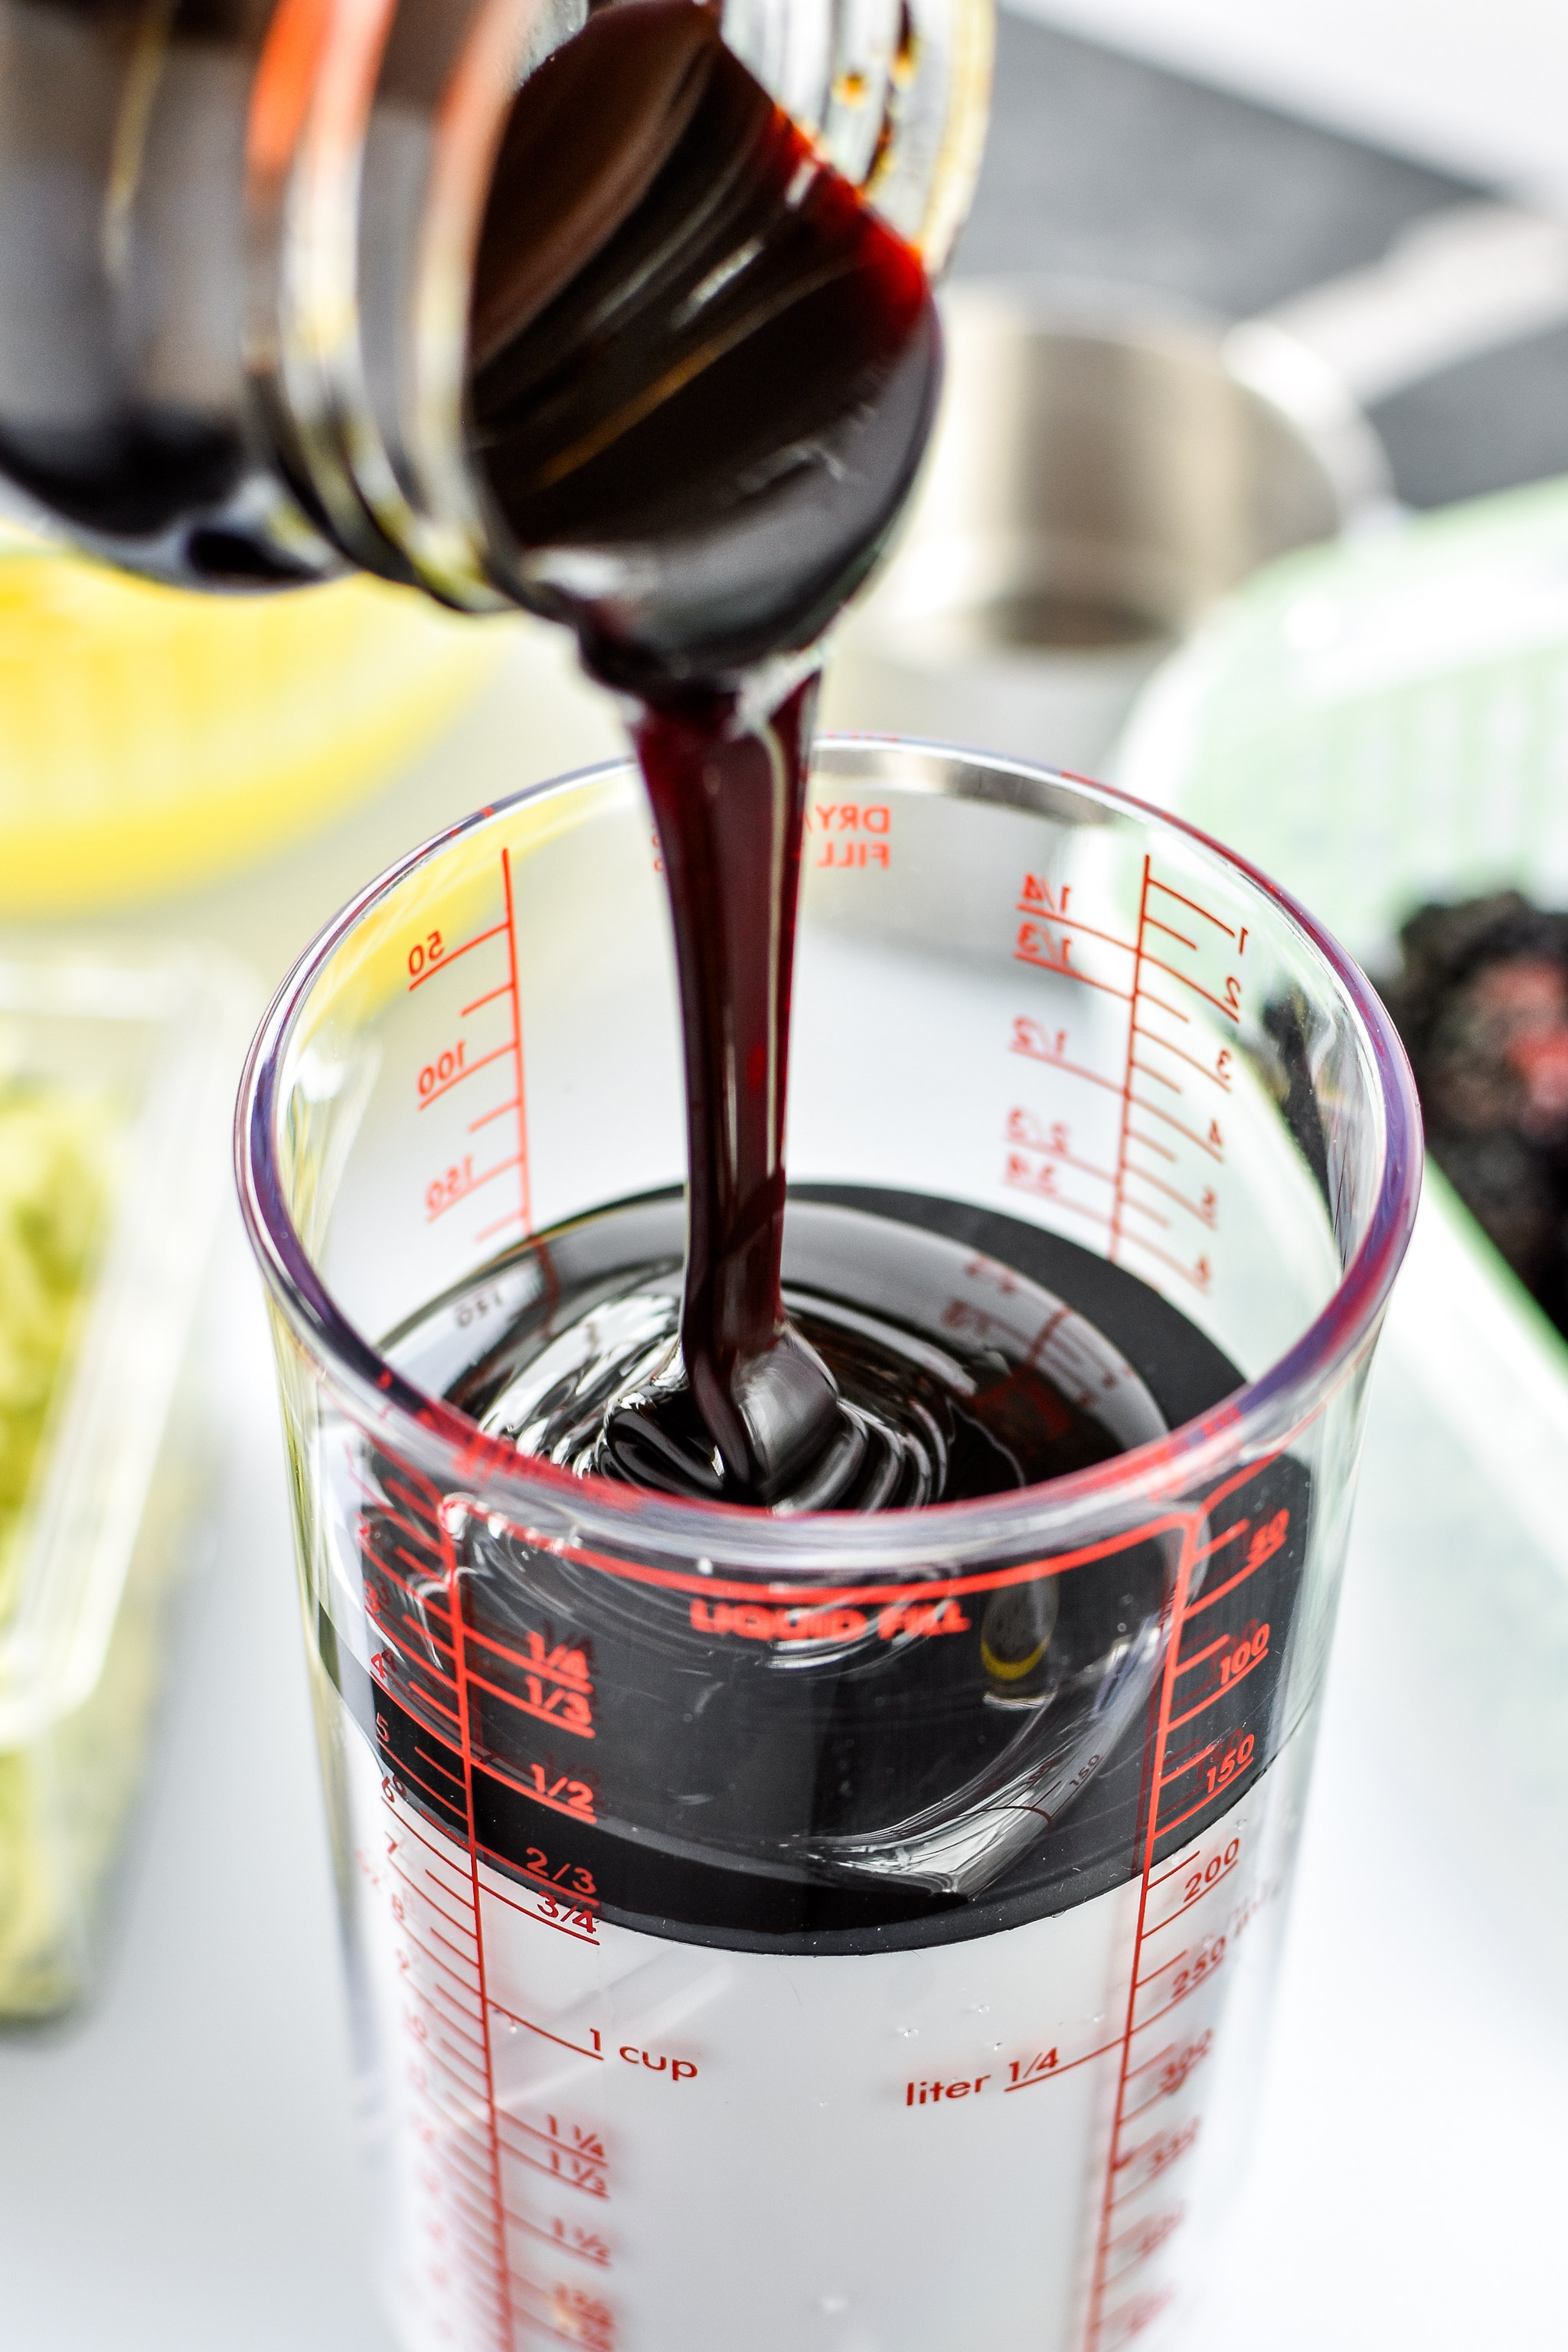 Using an OXO adjustable measuring cup to measure molasses.